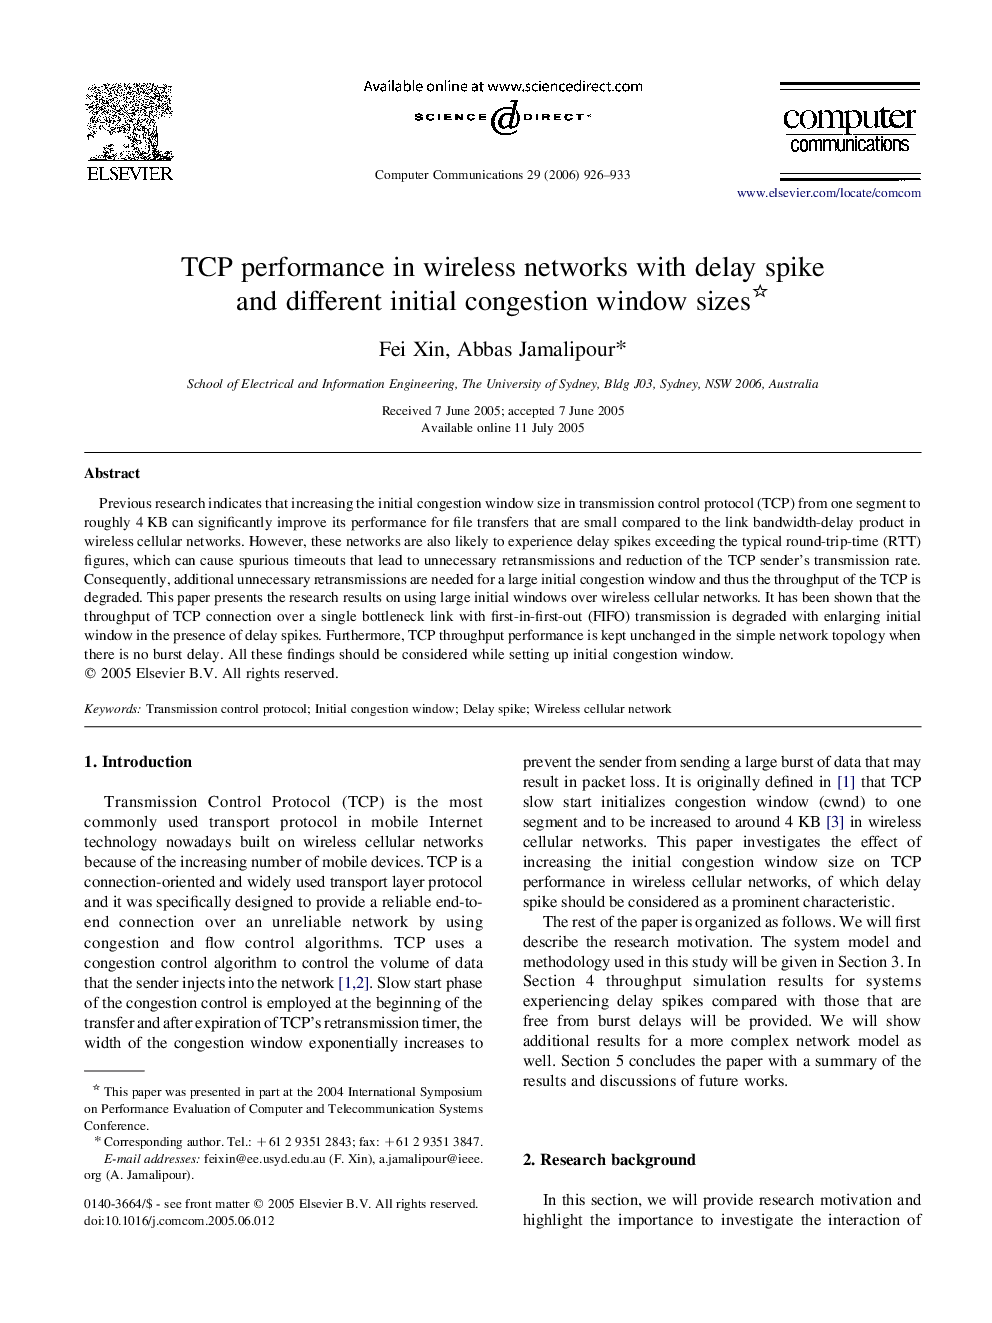 TCP performance in wireless networks with delay spike and different initial congestion window sizes 